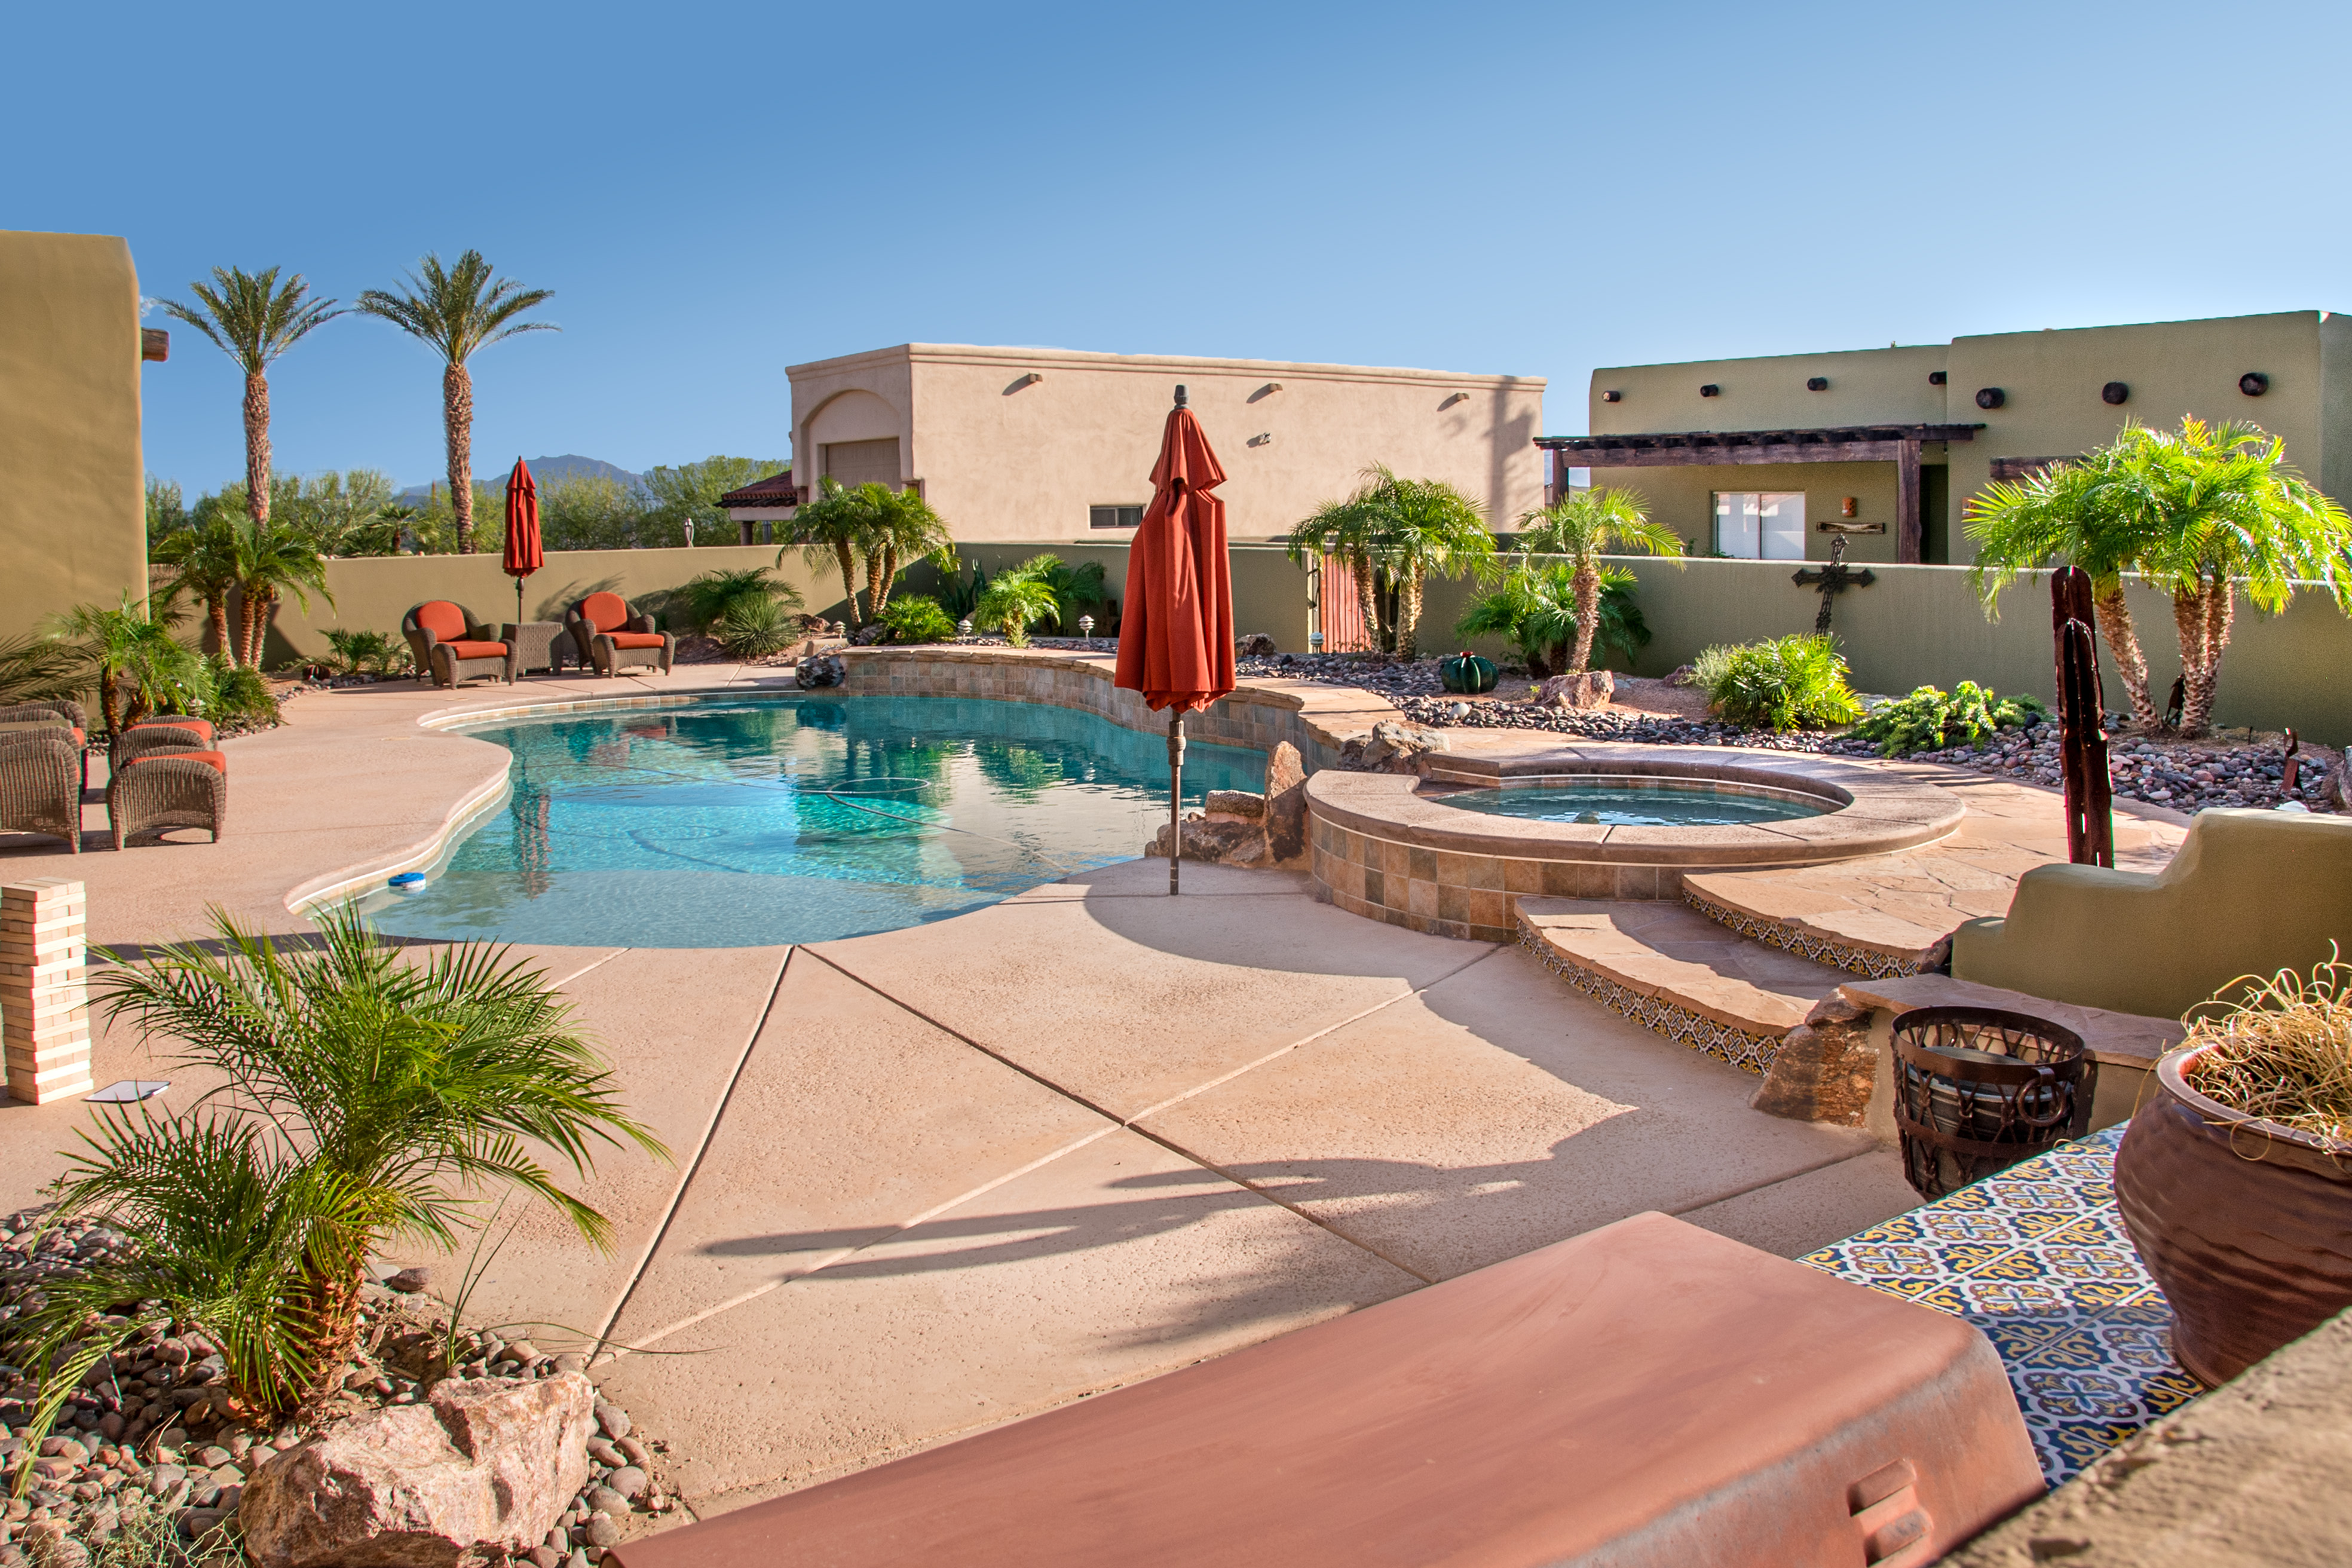 New Listing Discounts: Heated Pool/Spa, Casita, RV/Boat Parking, Luxe Backyard